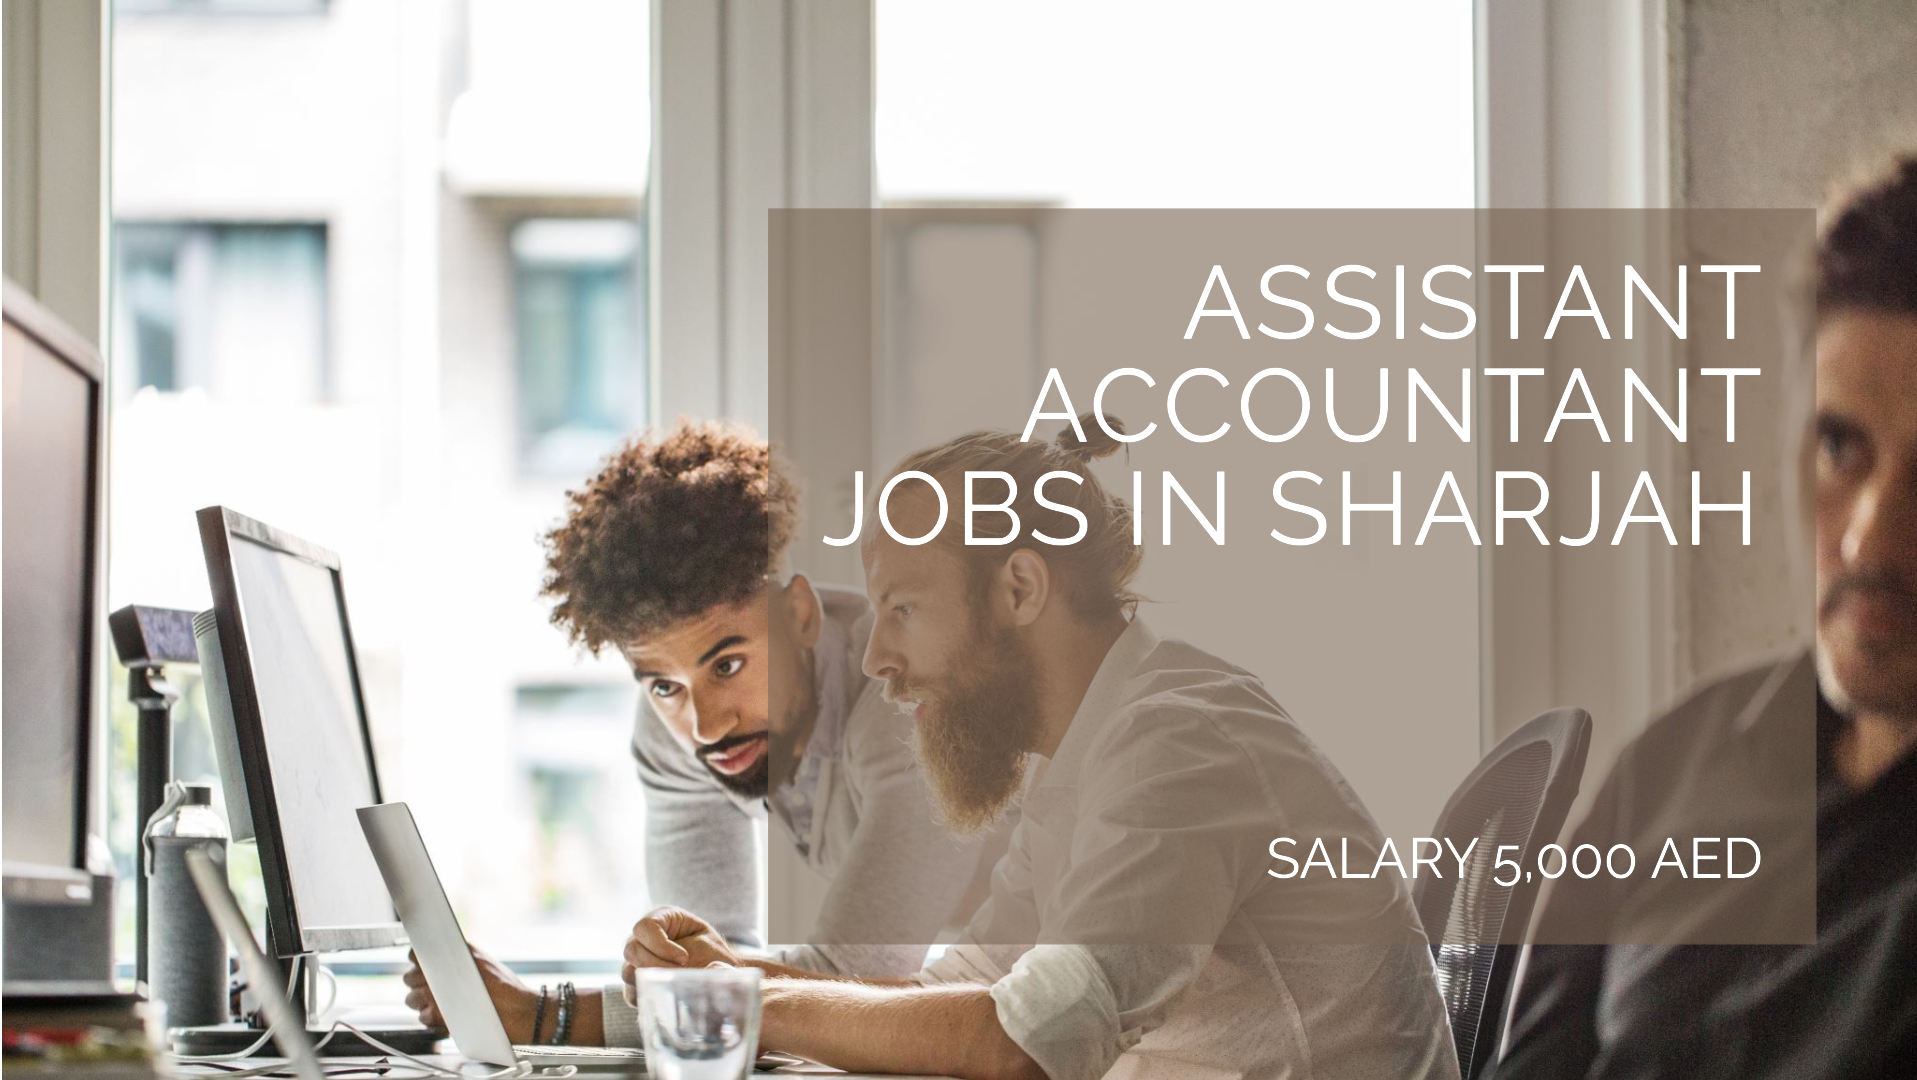 assistant accountant jobs in sharjah with salary 5,000 AED